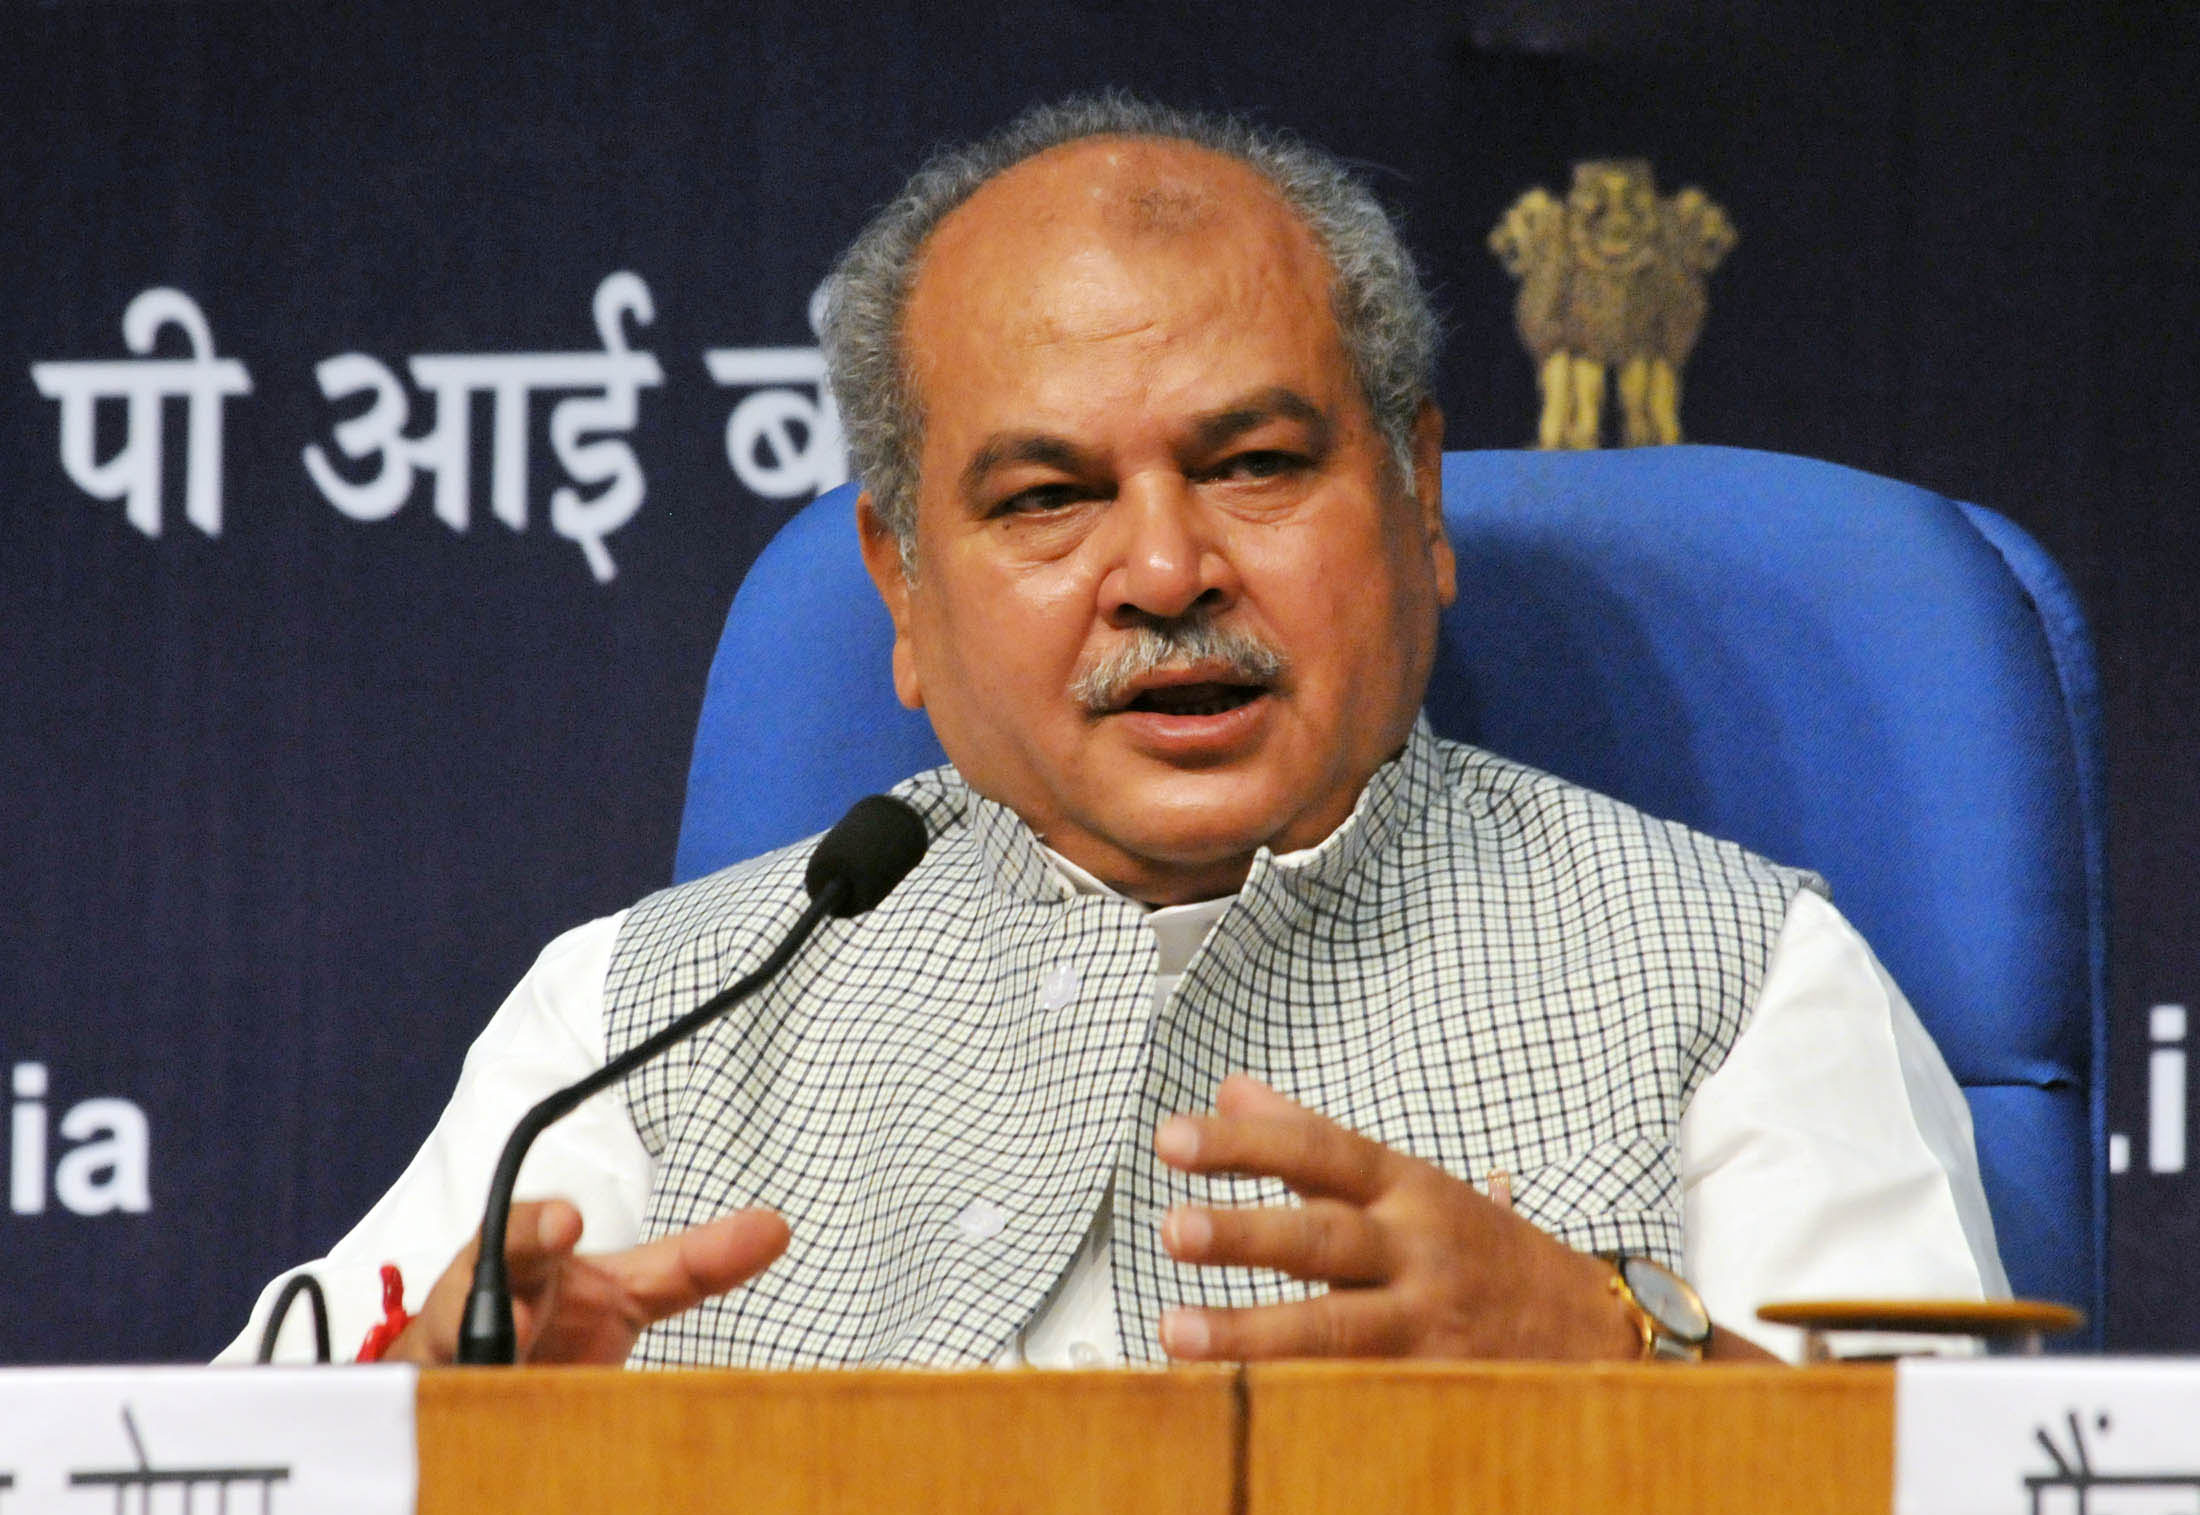 Amid farmers' protest against farm laws, Narendra Singh Tomar on Saturday said that the government was ready for more talks.